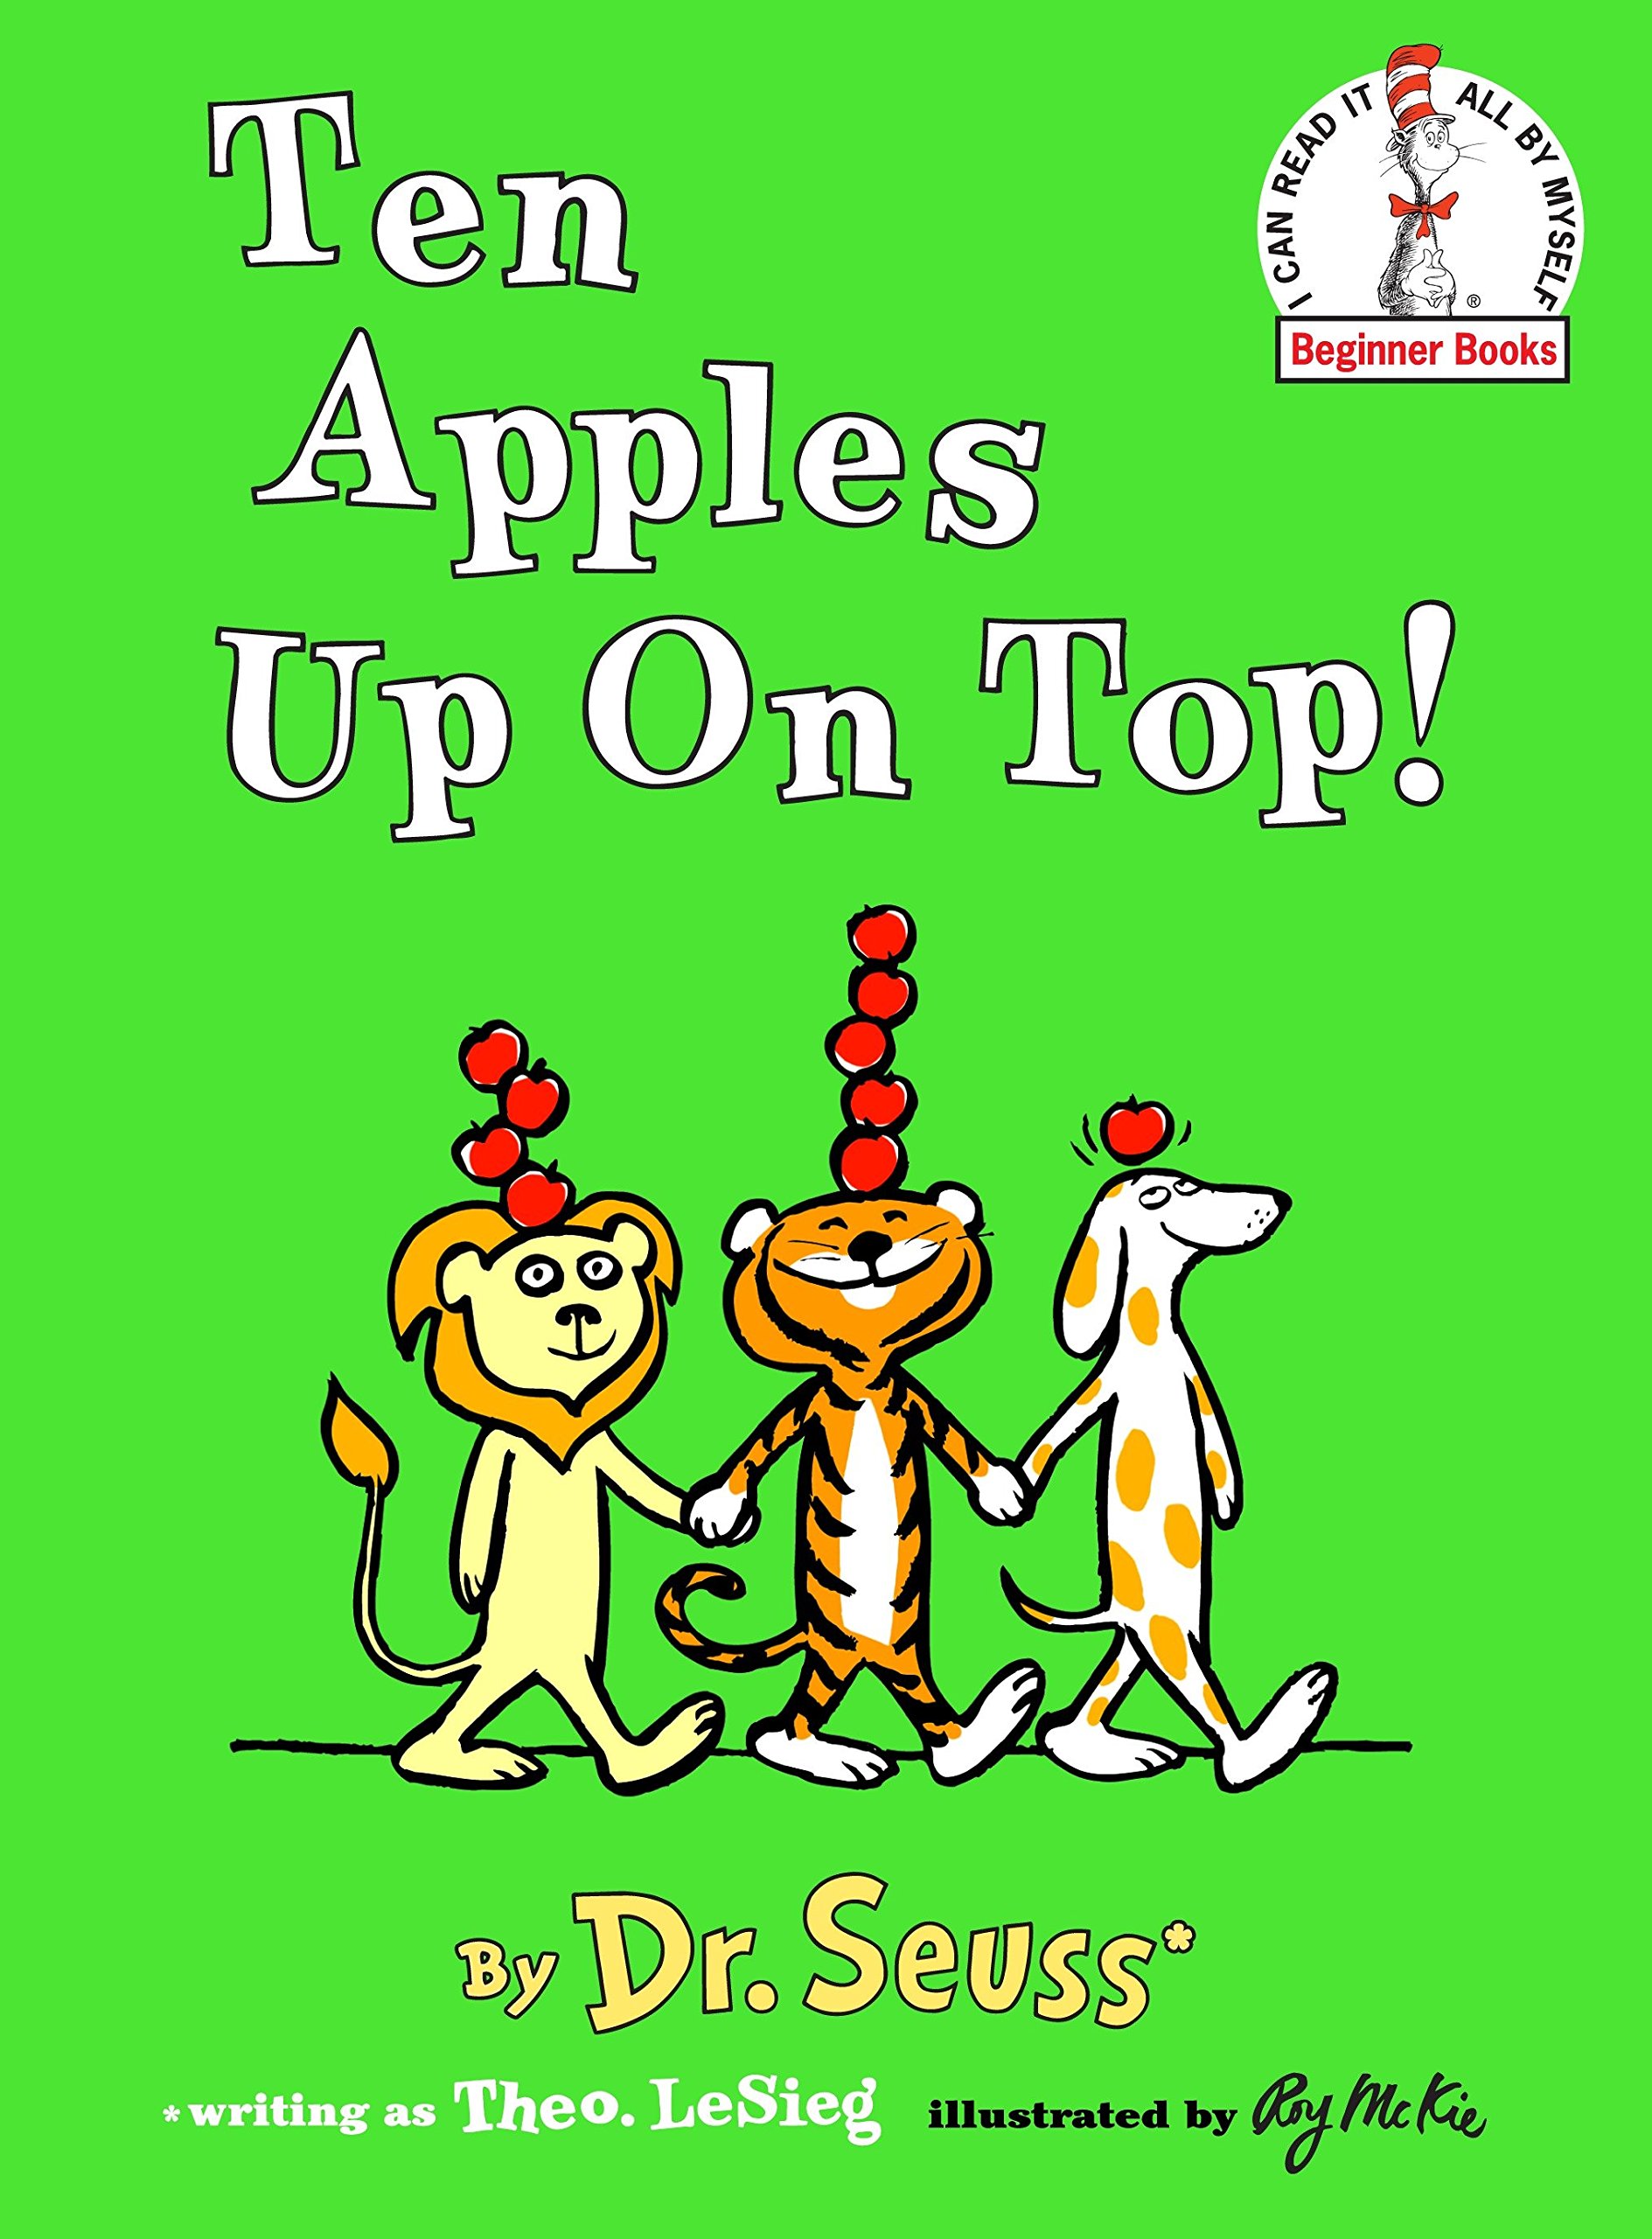 Ten Apples Up On Top! book cover